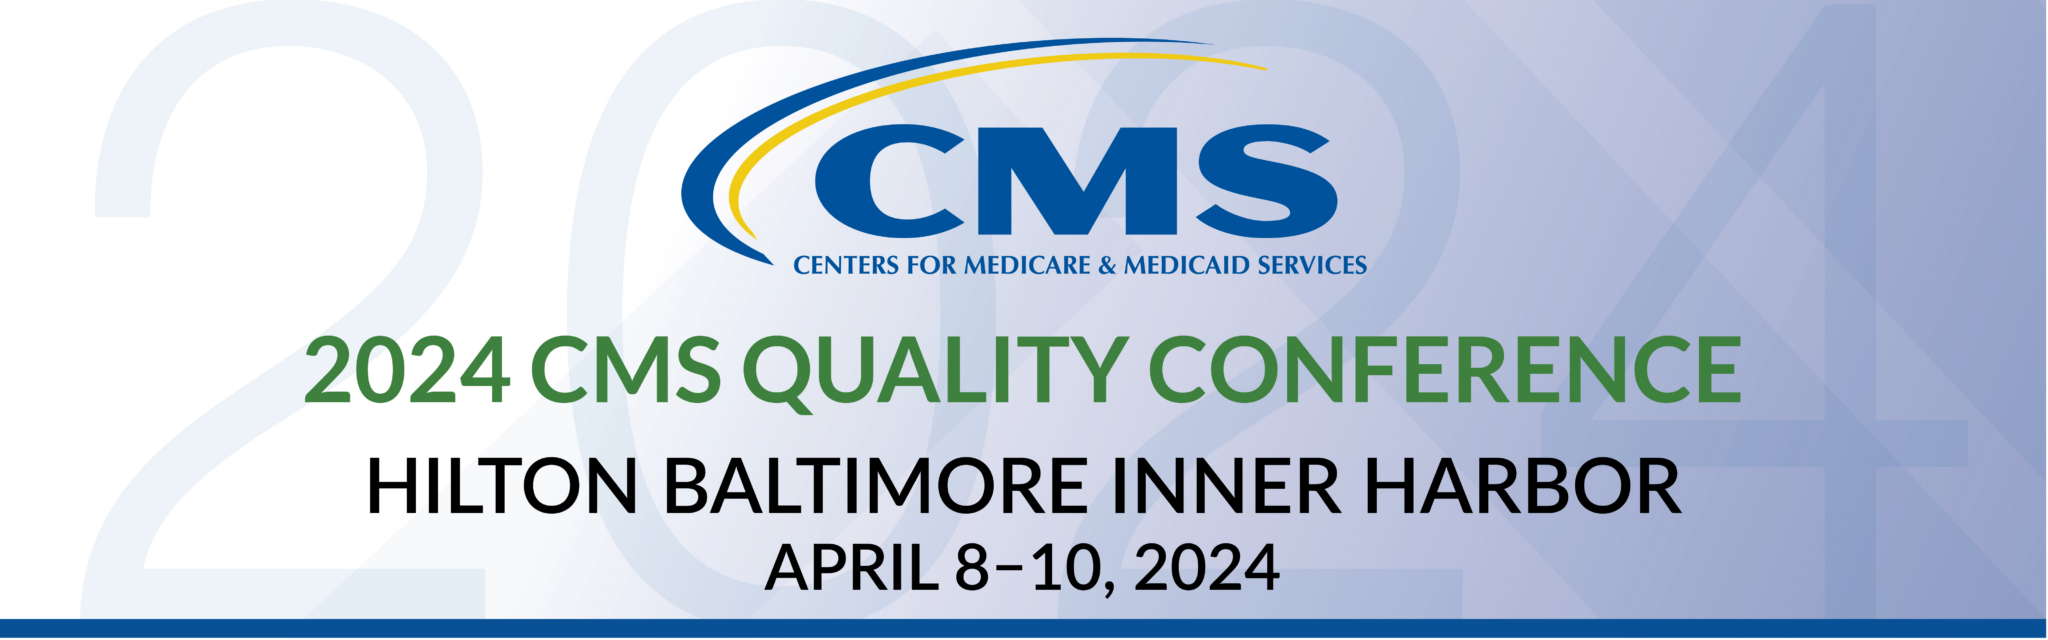 Industry Event 2024 CMS Quality Conference